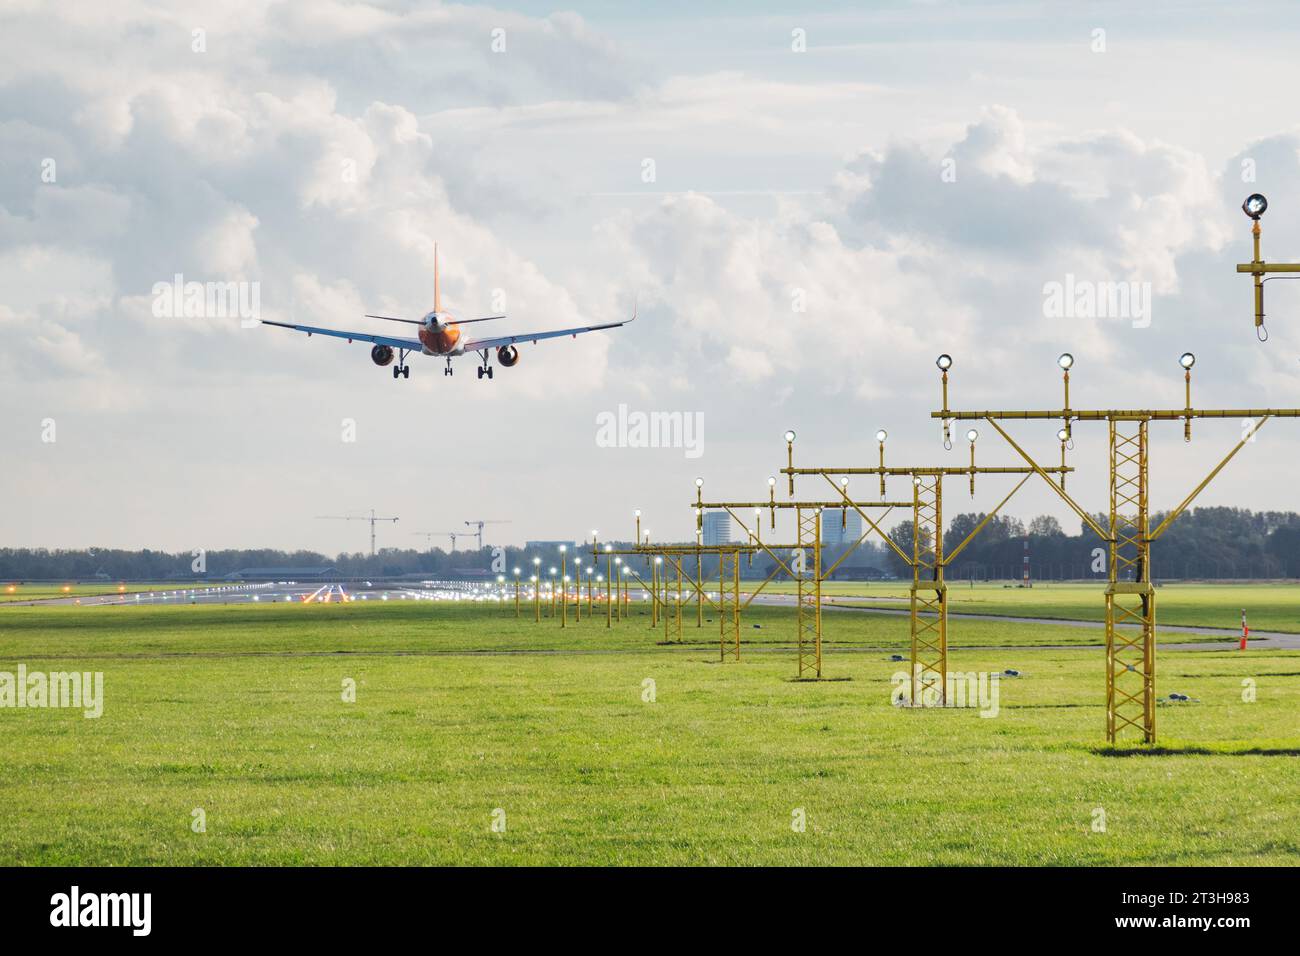 an Airbus A320 jet flies over approach lights landing on Amsterdam Schiphol airport's Polderbaan runway on a sunny autumn afternoon Stock Photo